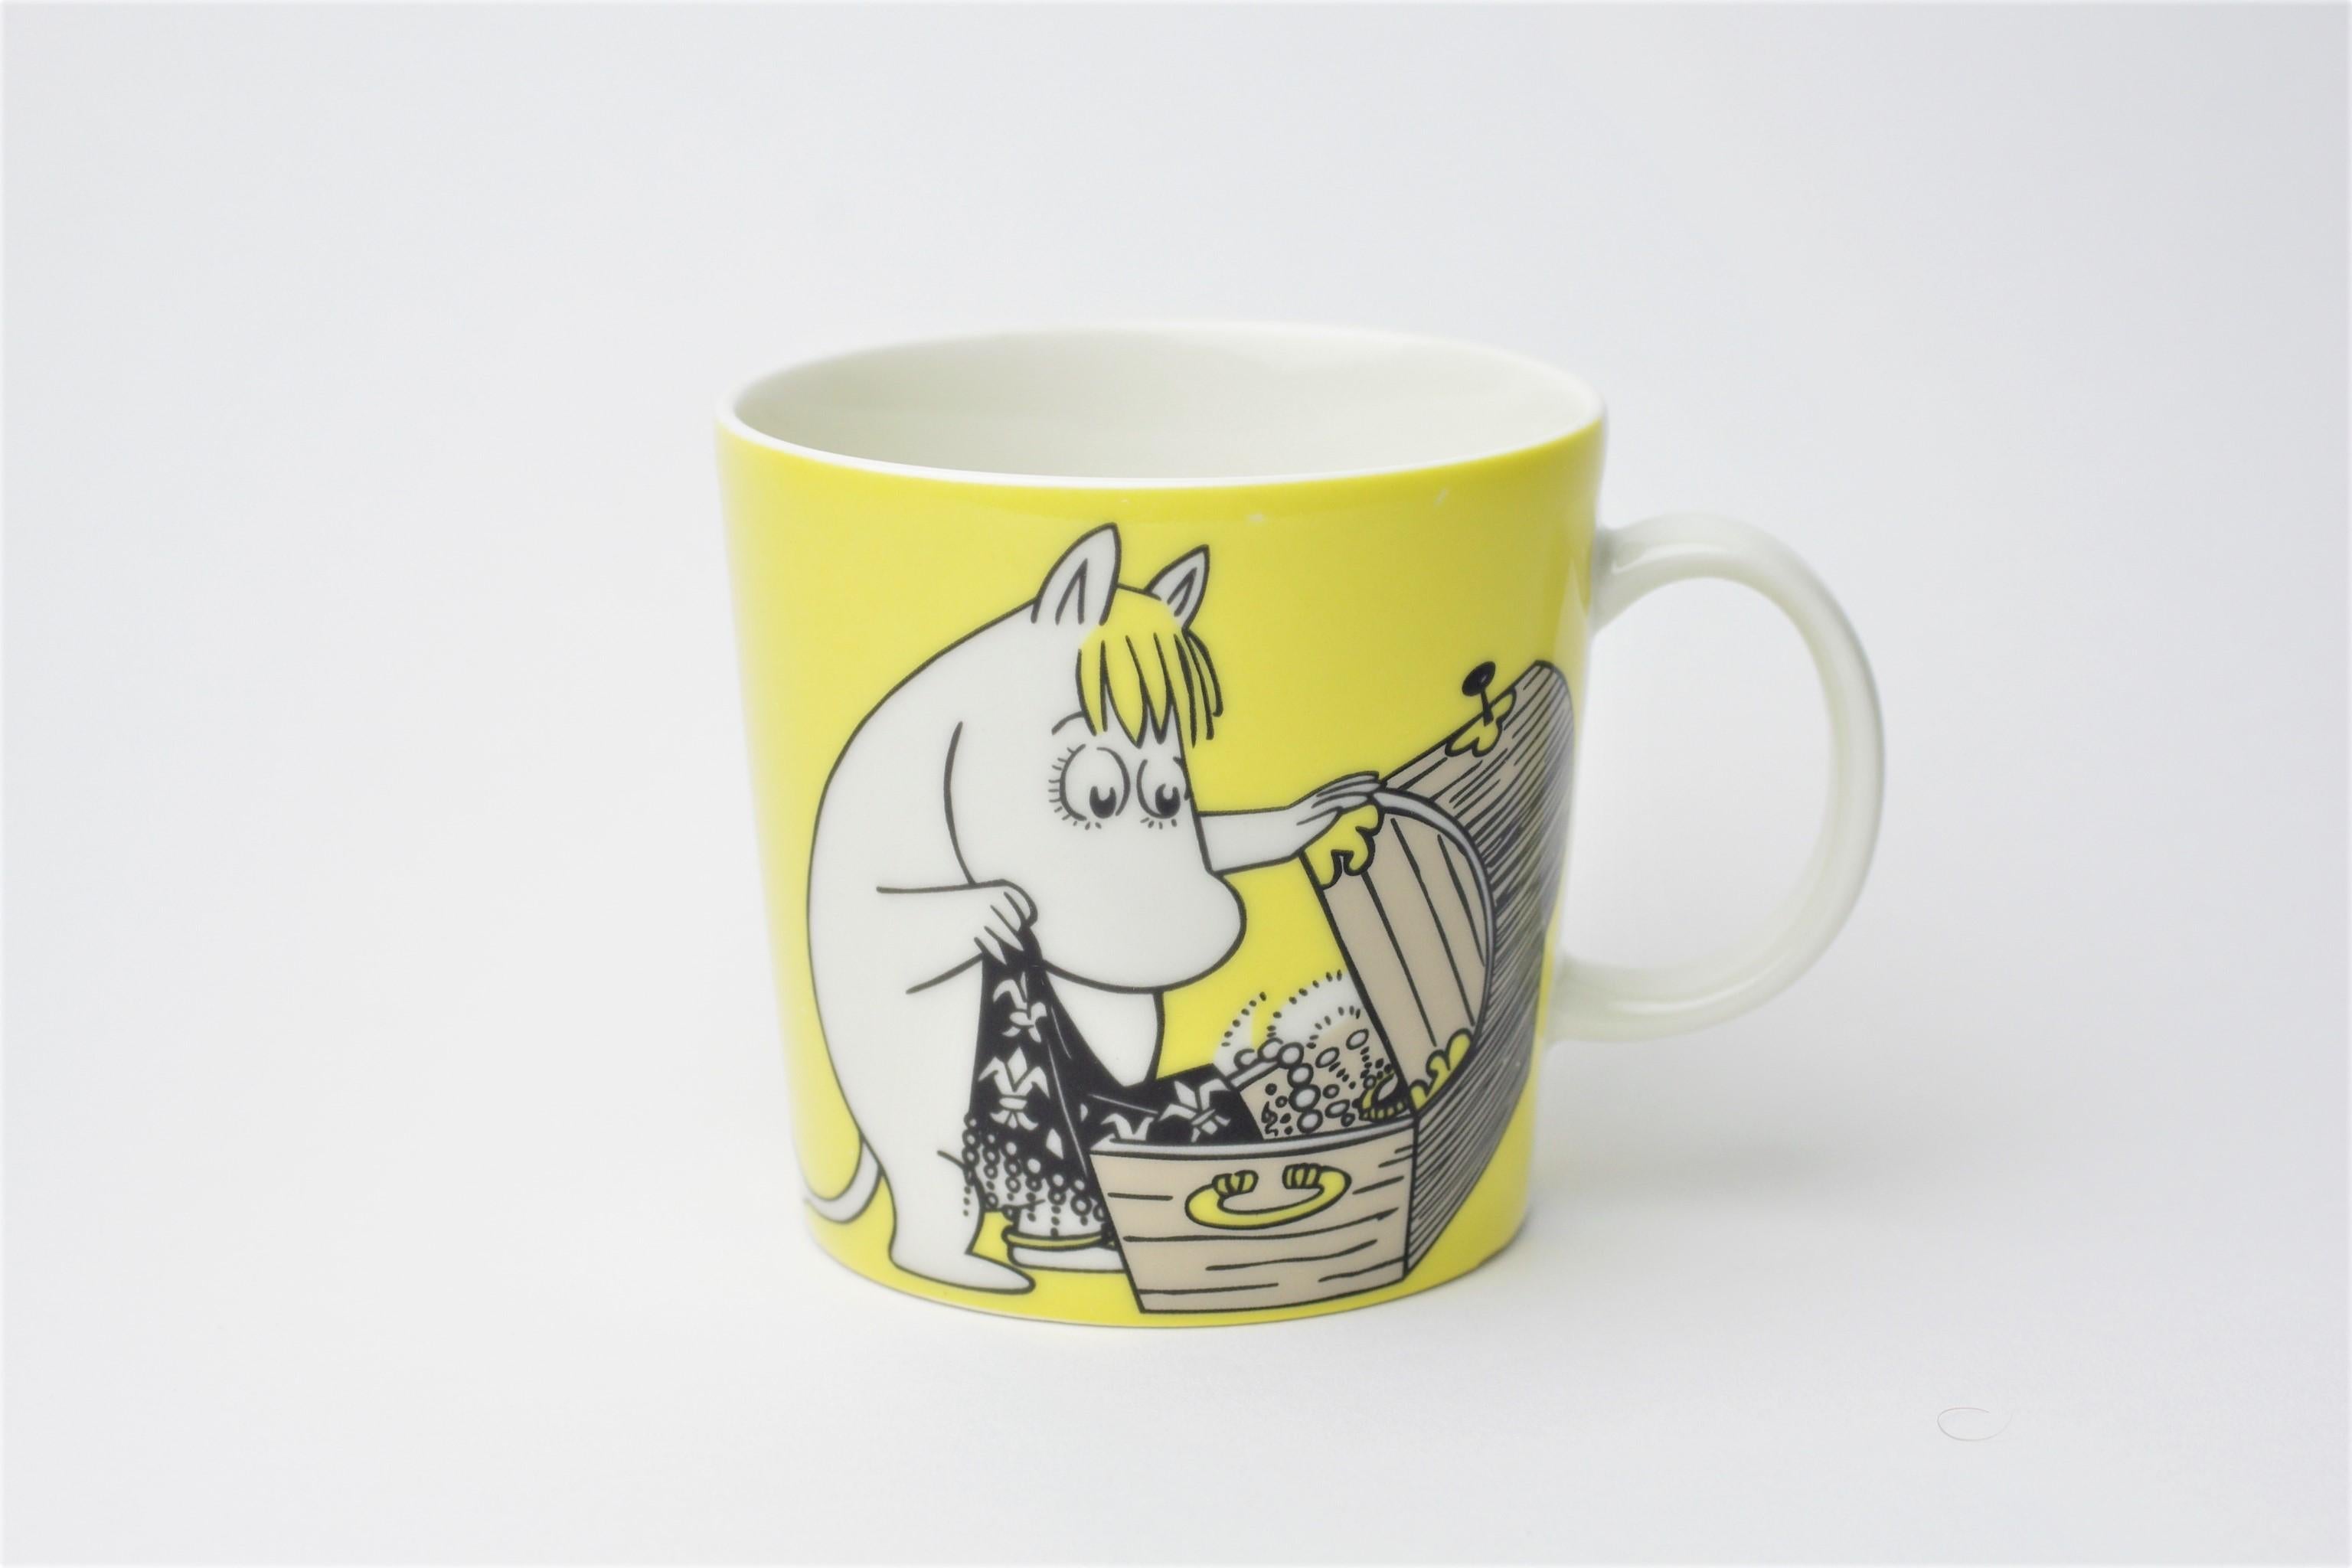 Product description:
This moomin mug depicts the character 